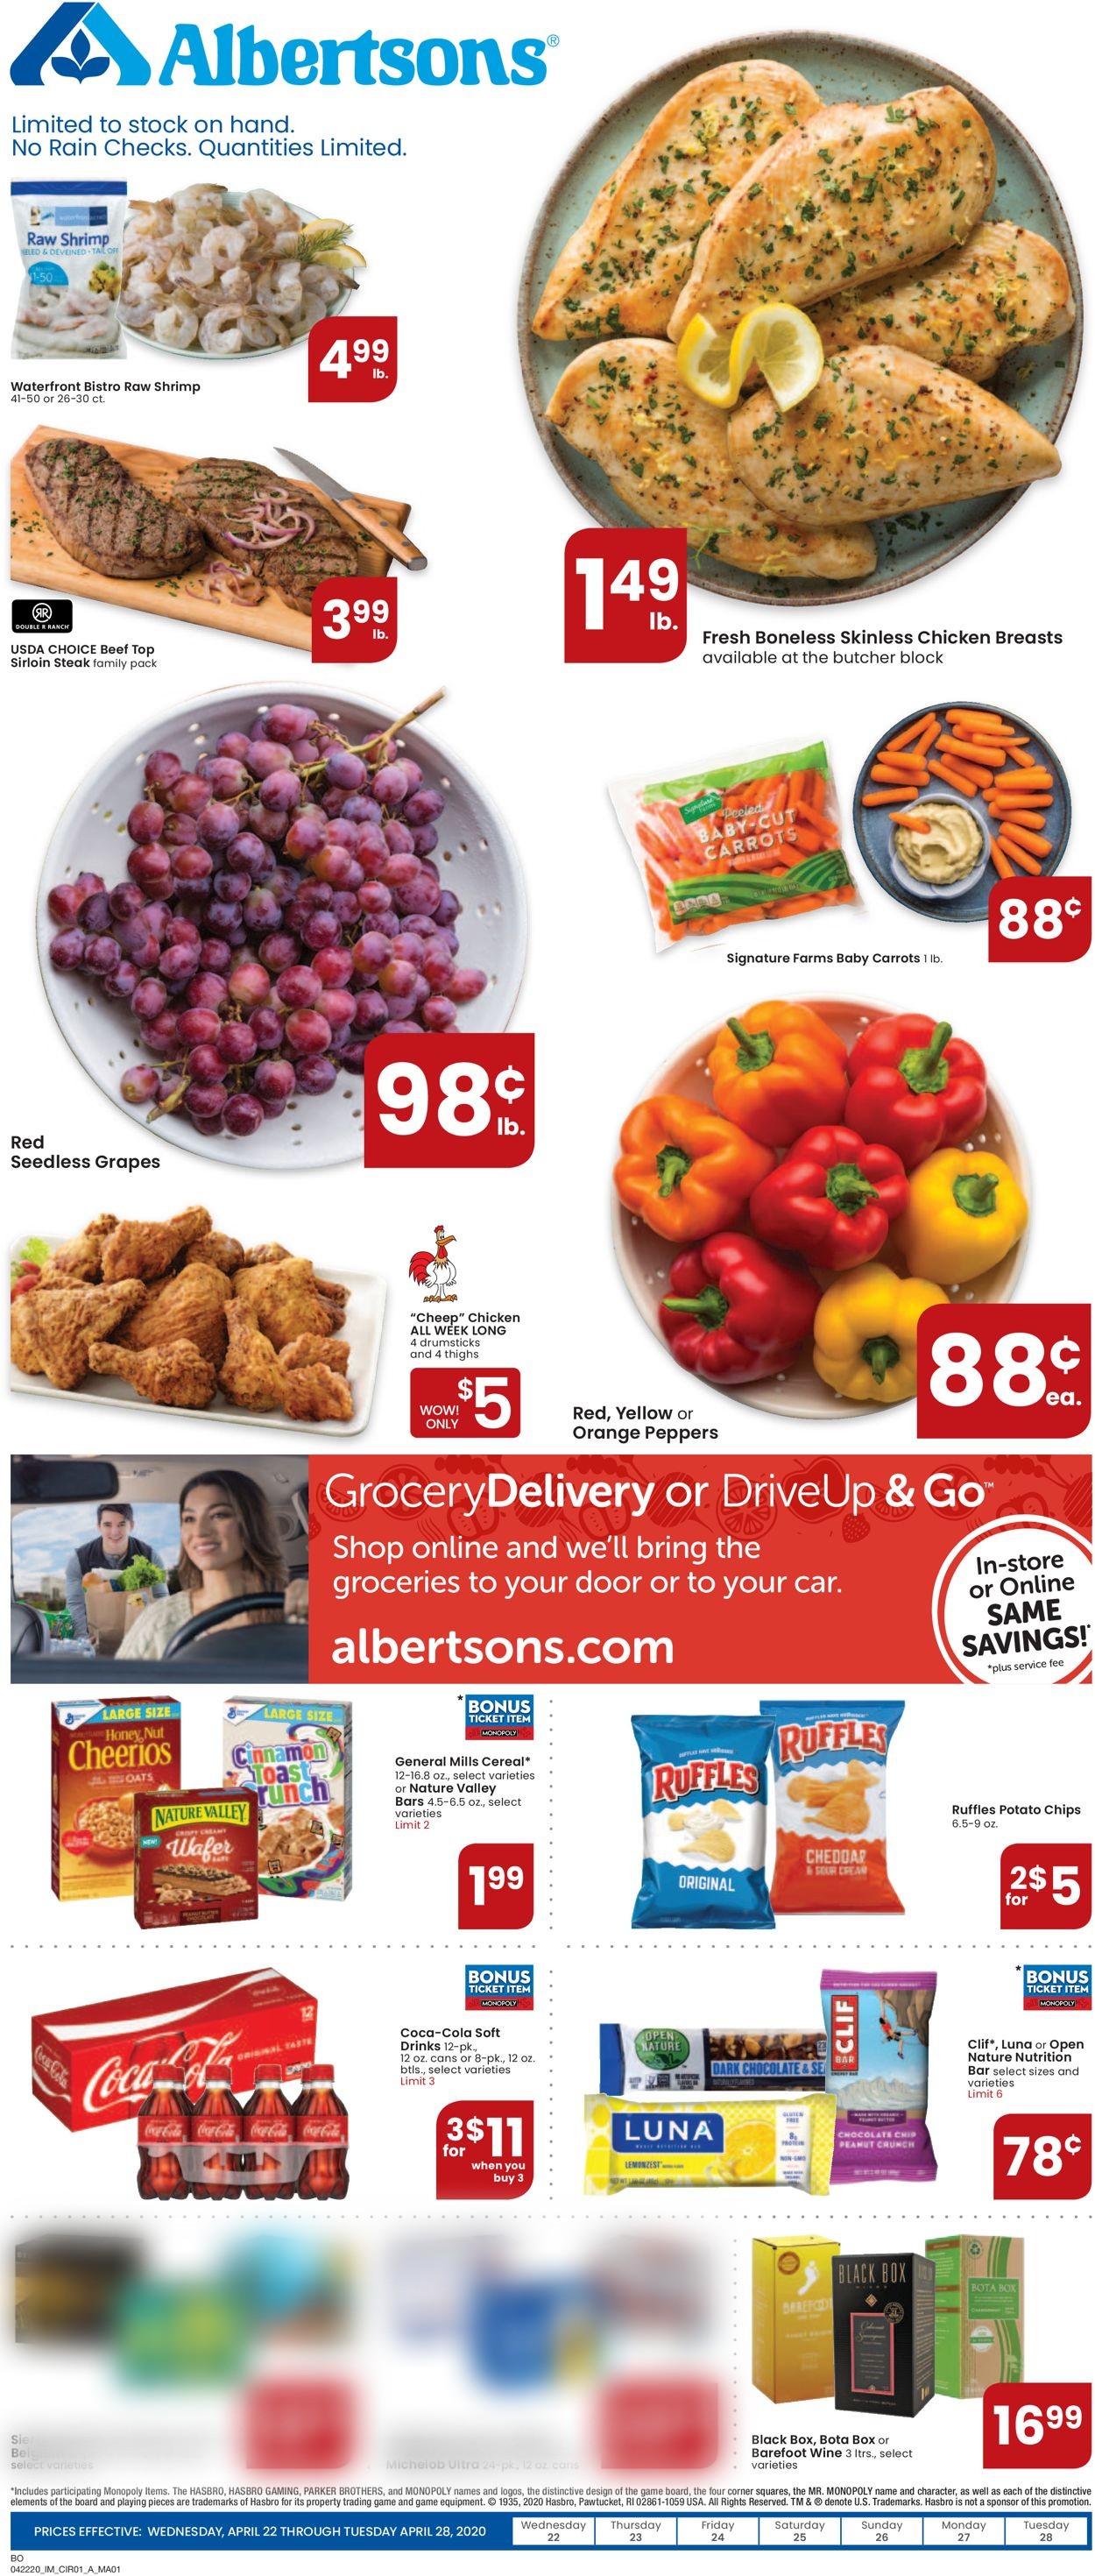 Albertsons Current weekly ad 04/22 - 04/28/2020 - frequent-ads.com